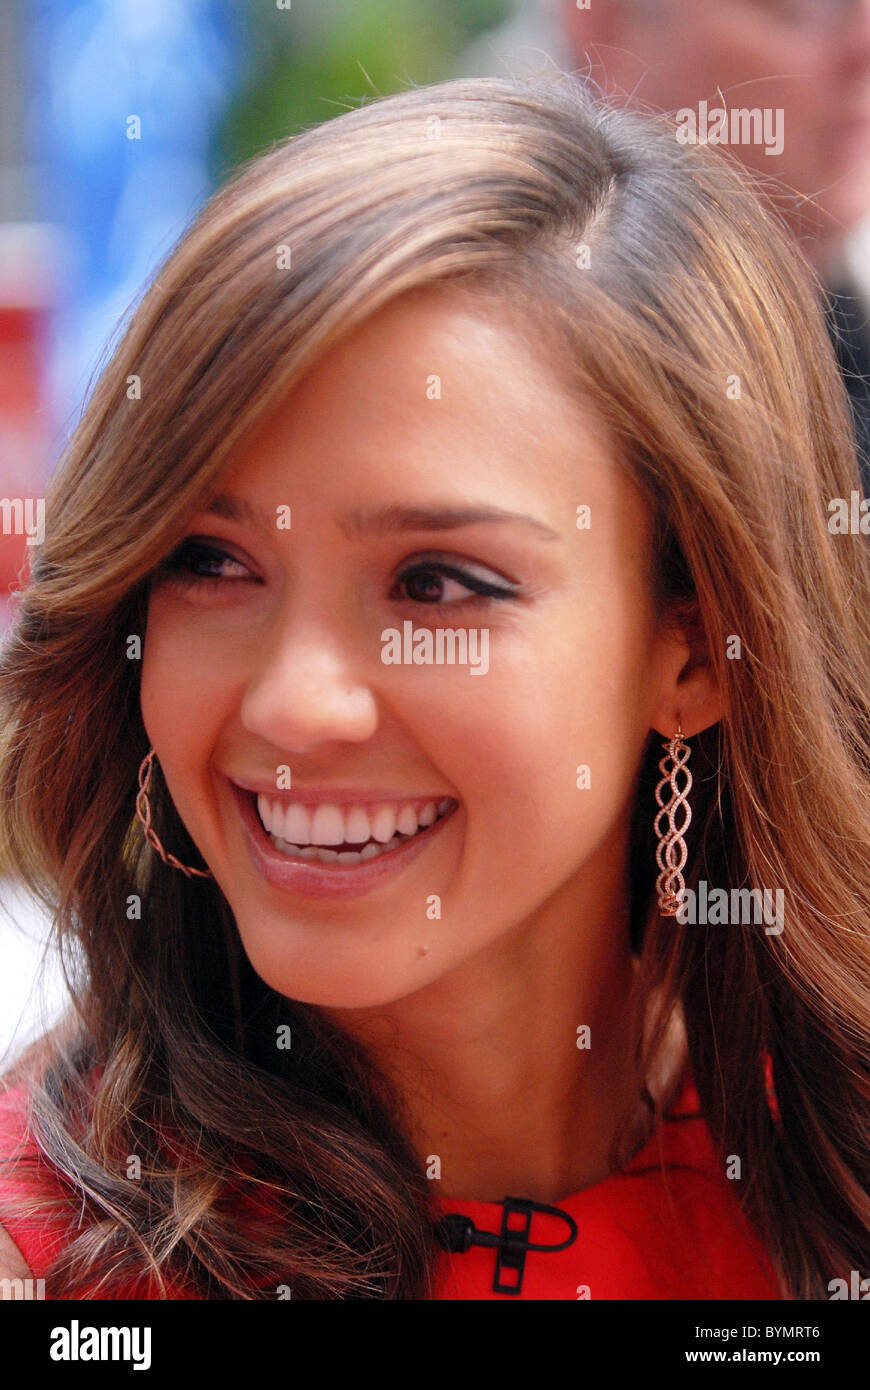 Jessica Alba Appearance on Nbc's Today Show. June 15, 2007 – Star Style